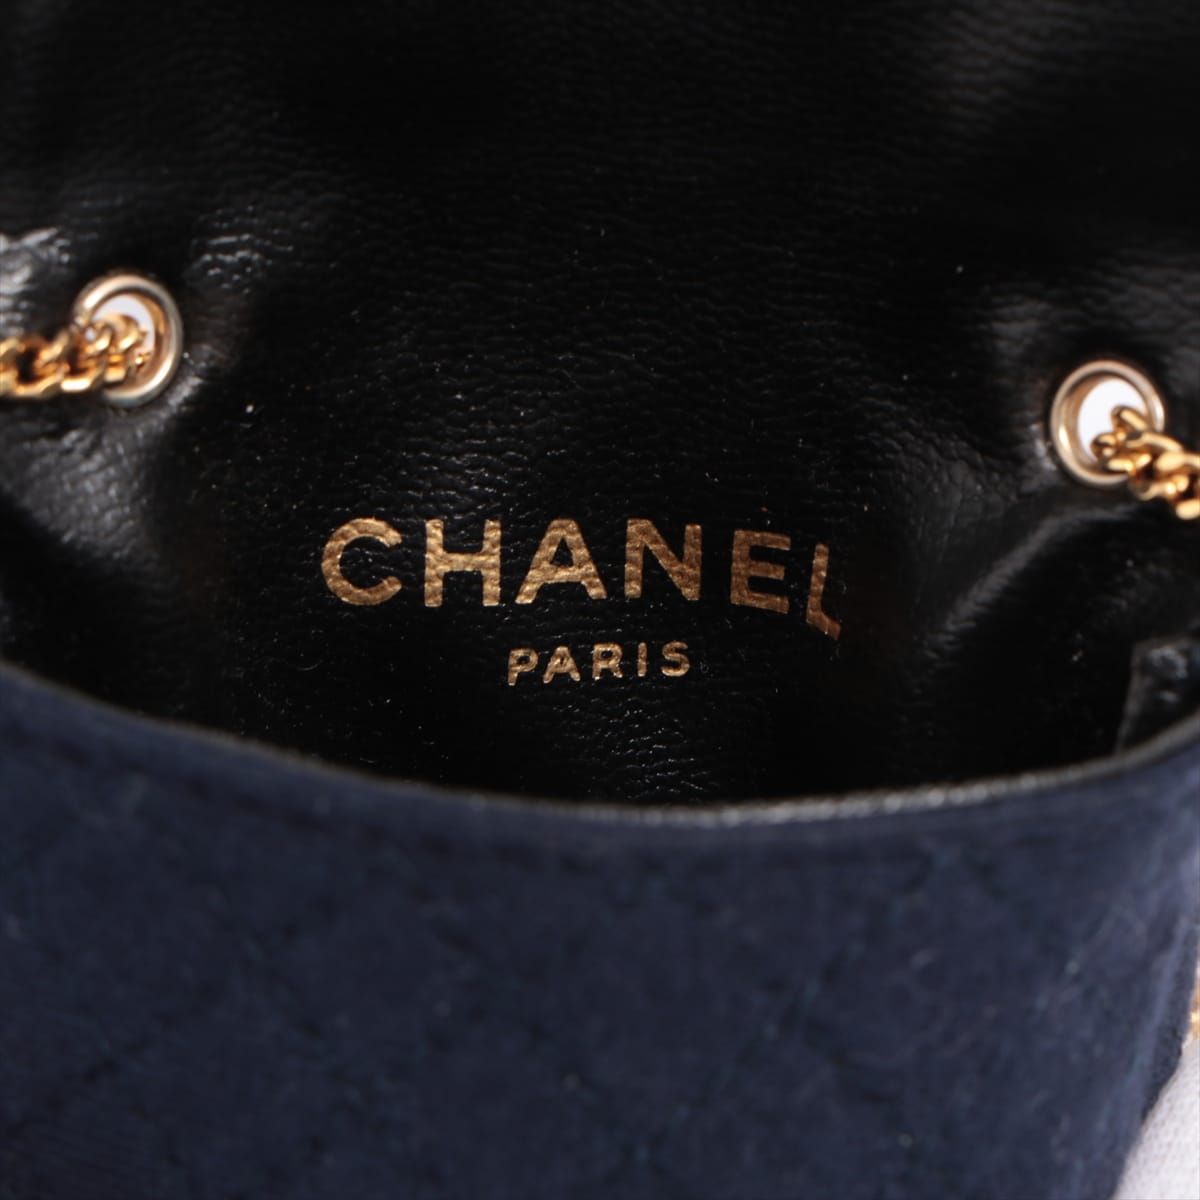 Chanel Coco Mark canvas Pouch Navy blue Gold Metal fittings